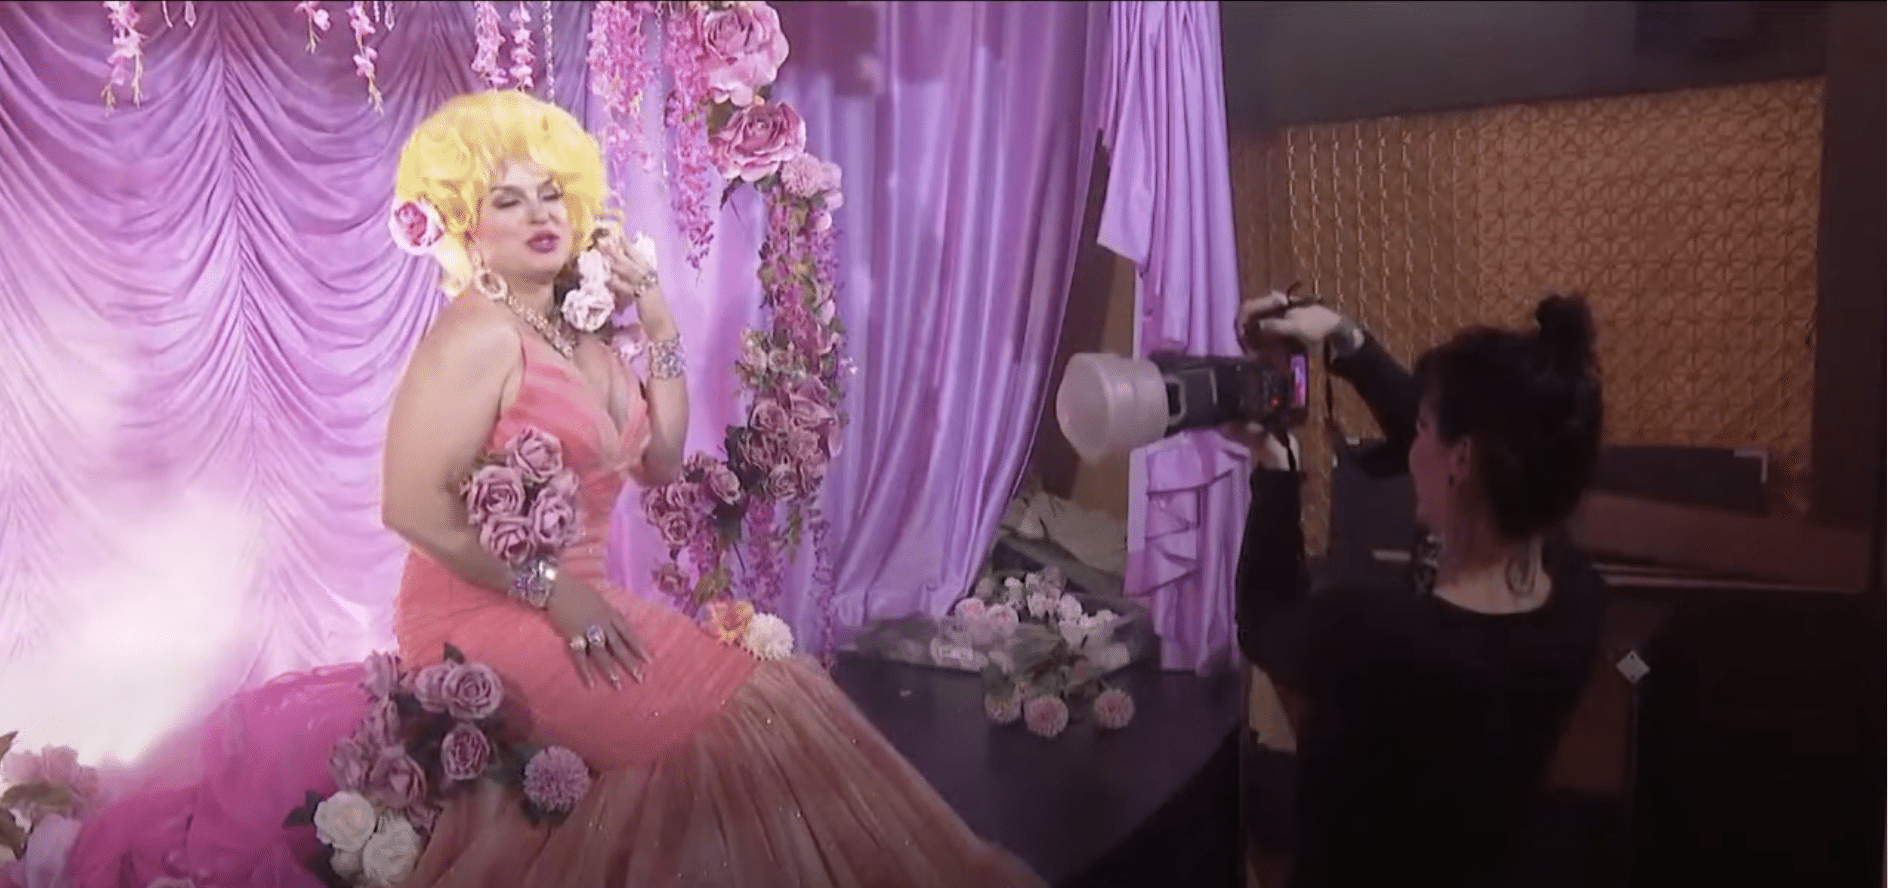 San Francisco has just named the nation’s first ever “drag laureate”